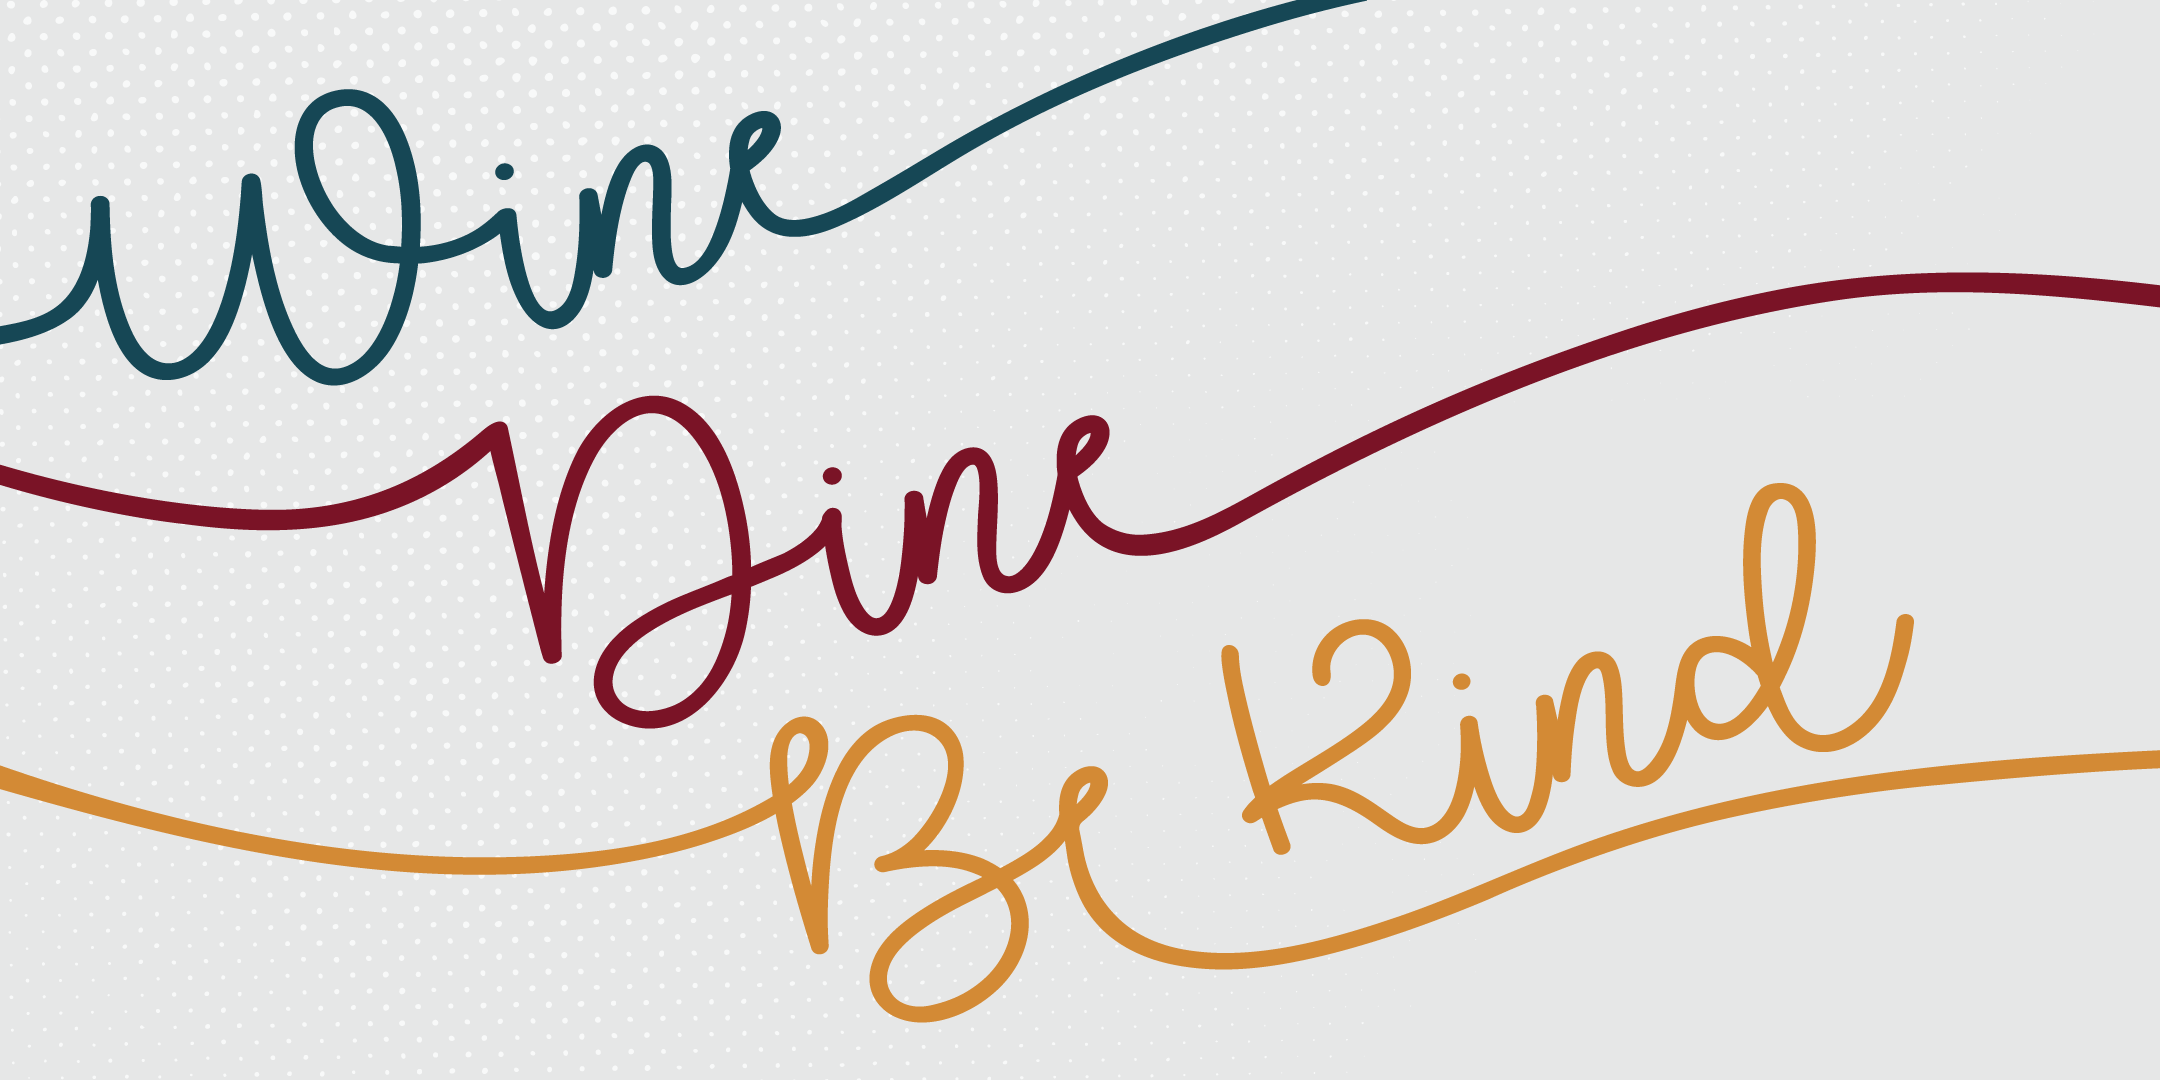 Wine, Dine, Be Kind 2020! Benefiting local youth & education programs